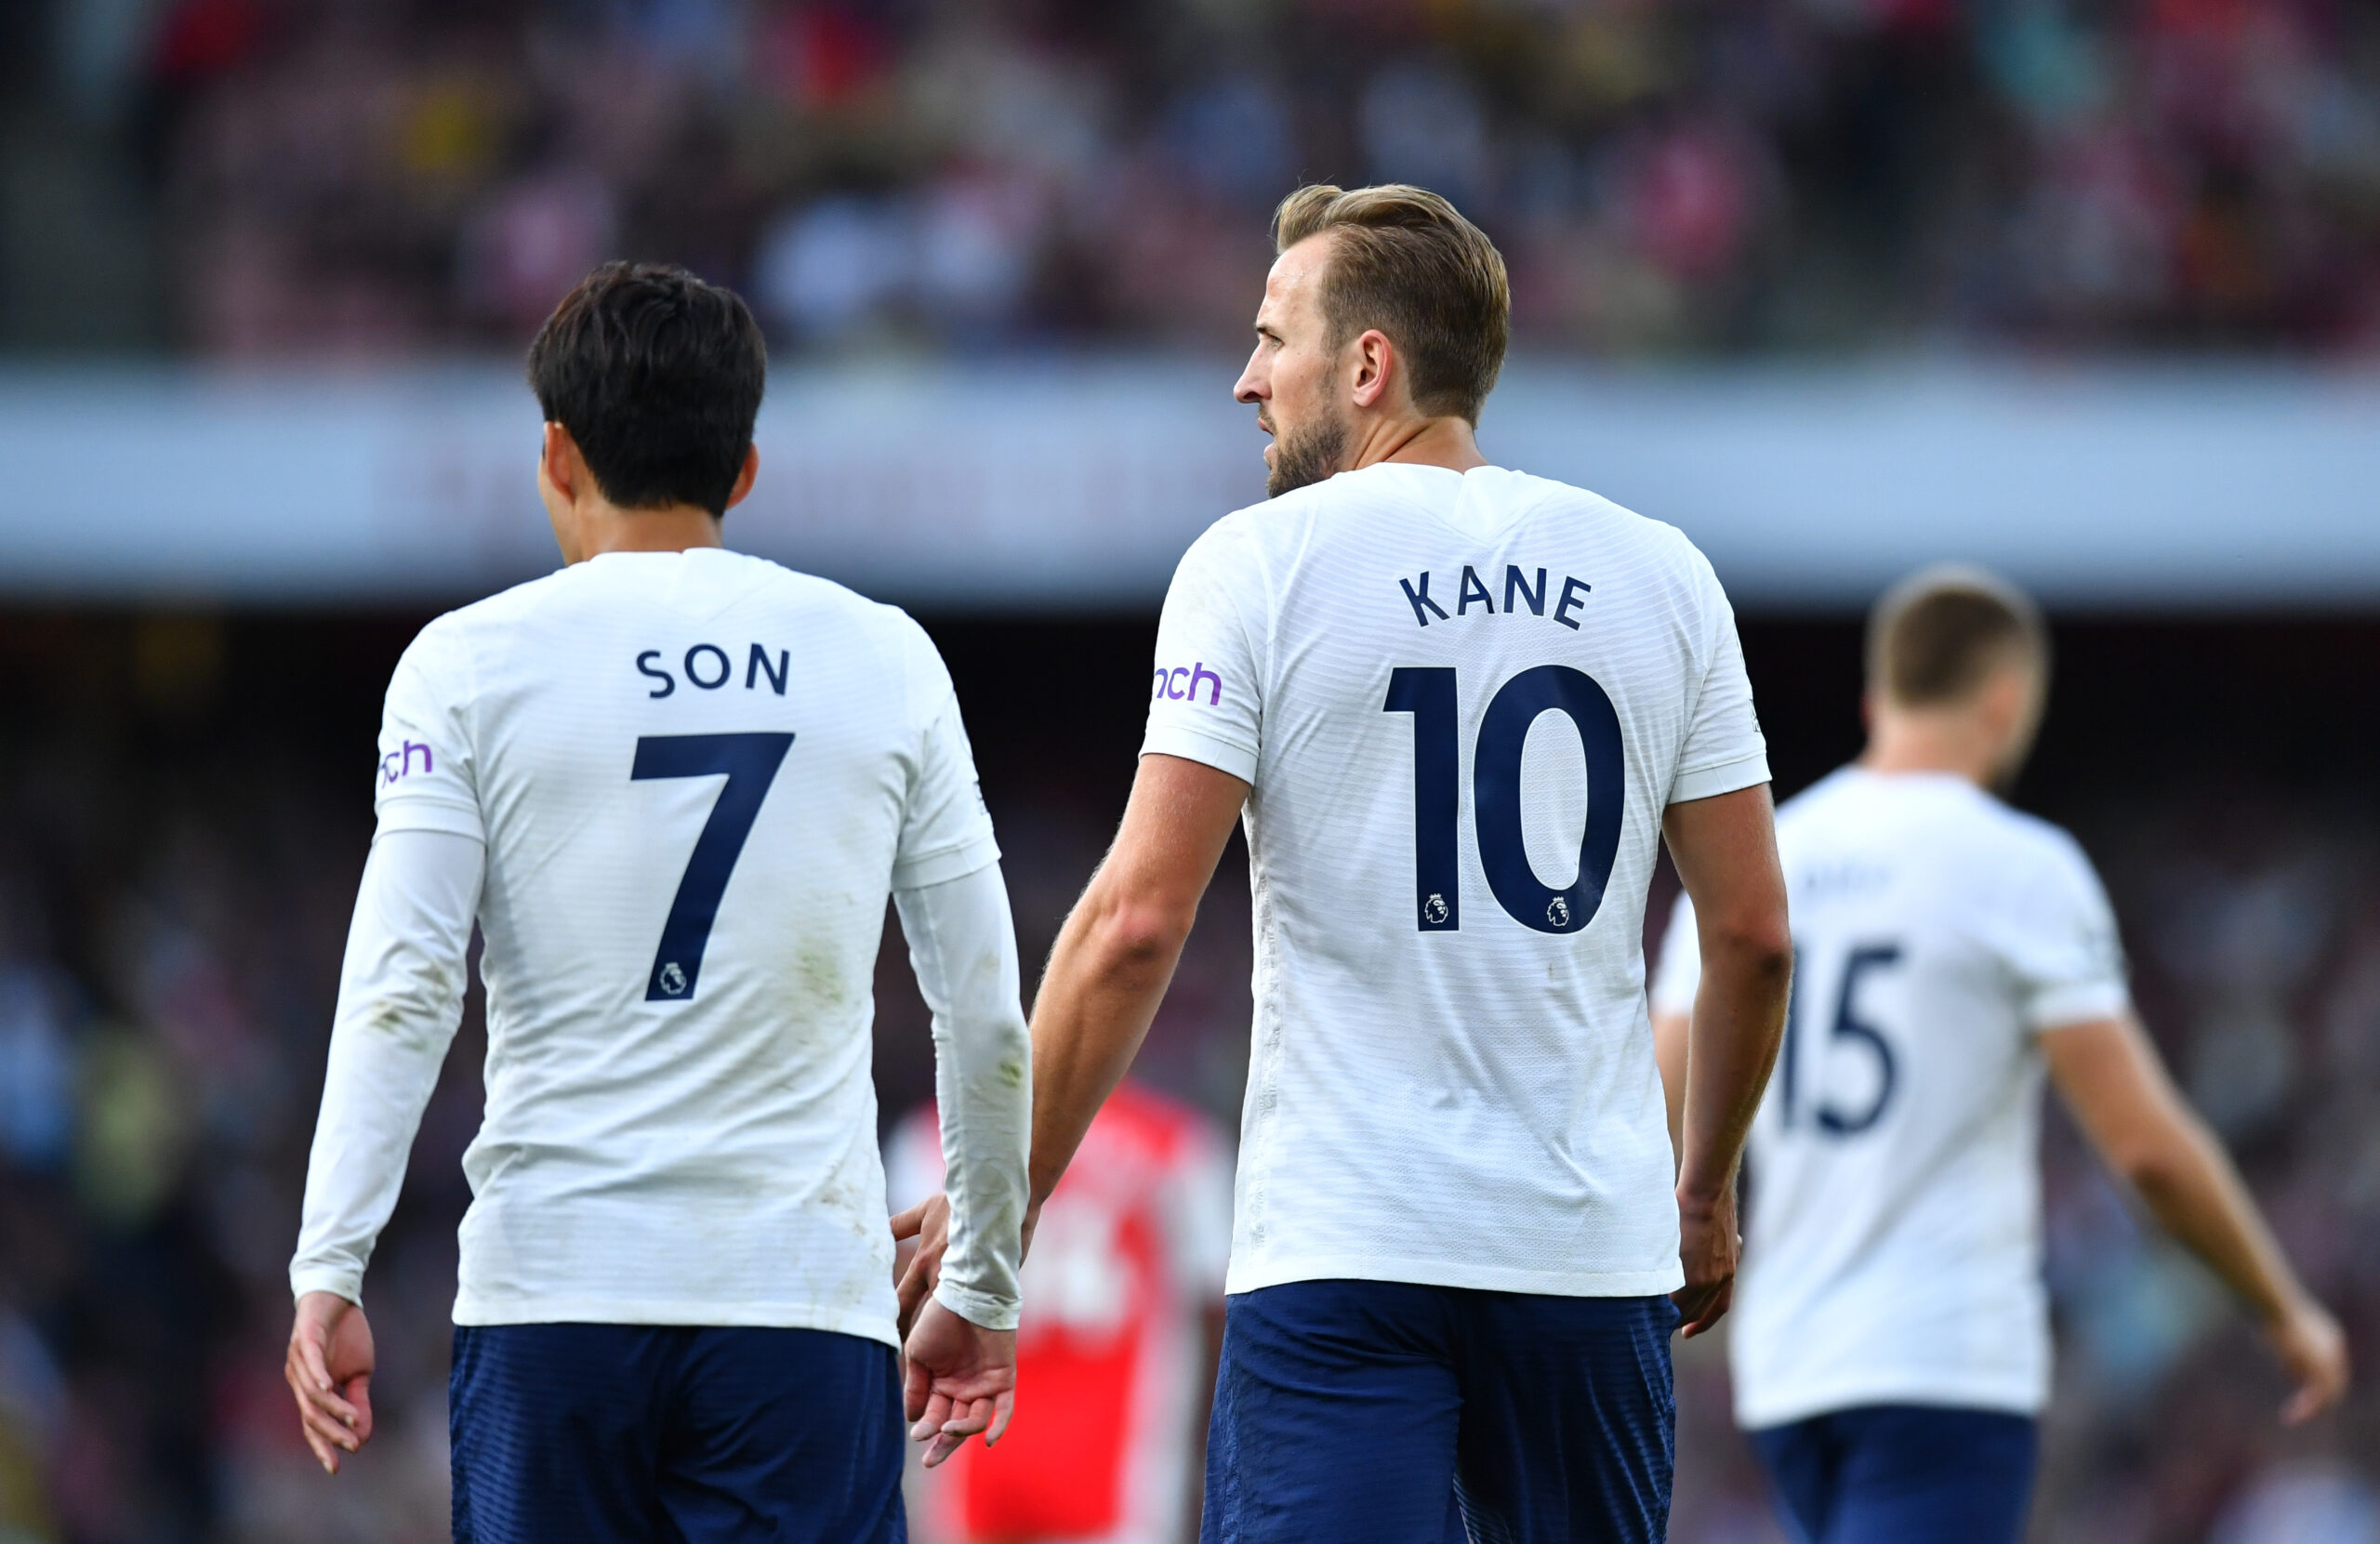 Son V Kane Who Is The Best Pick From Spurs Fantasy Football Community